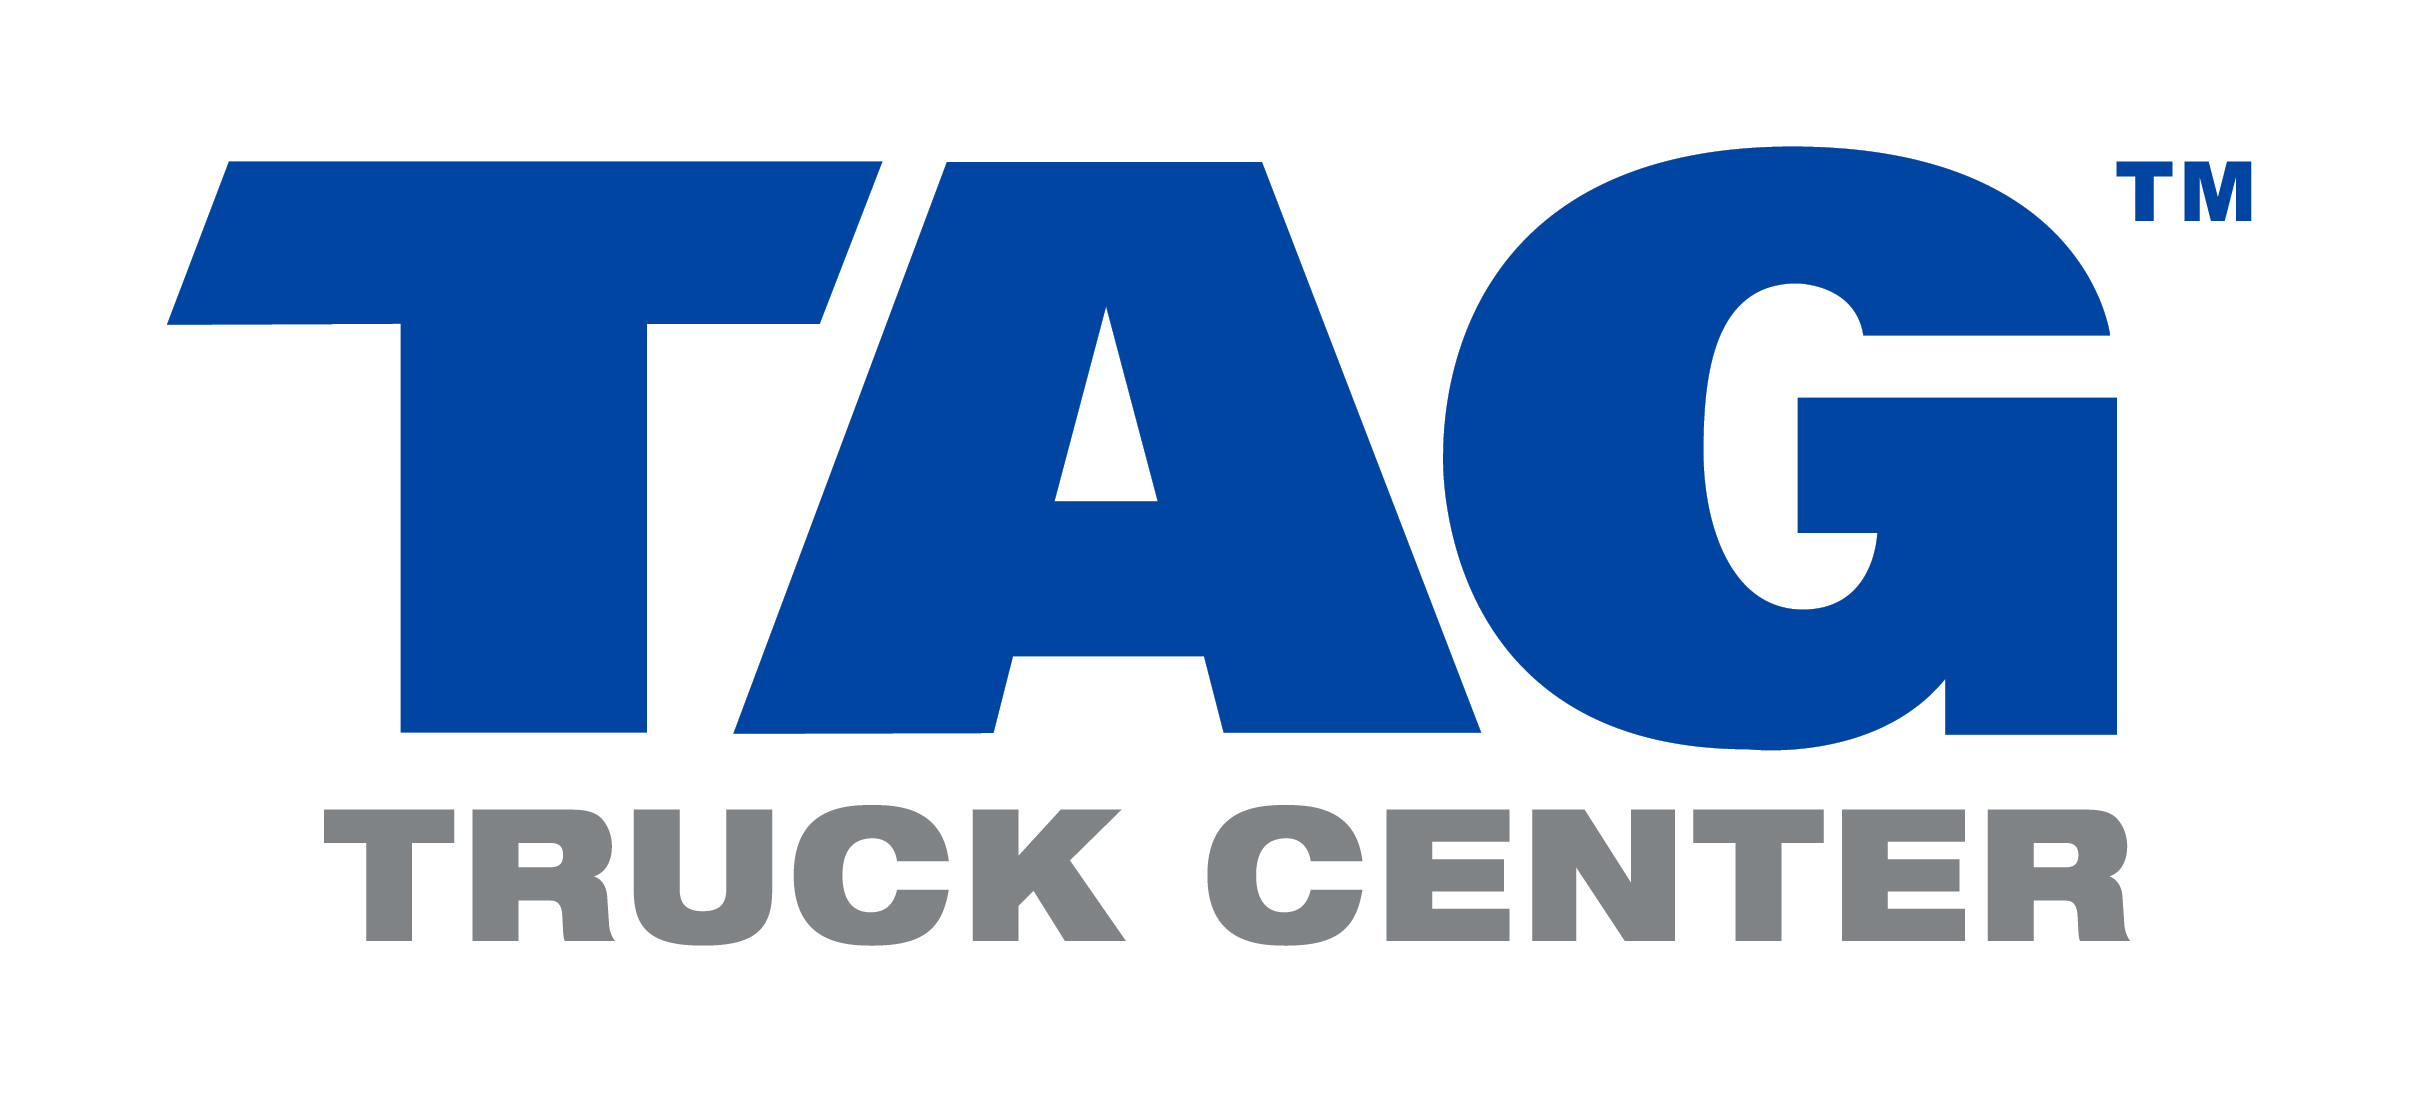 2TAG Truck Center